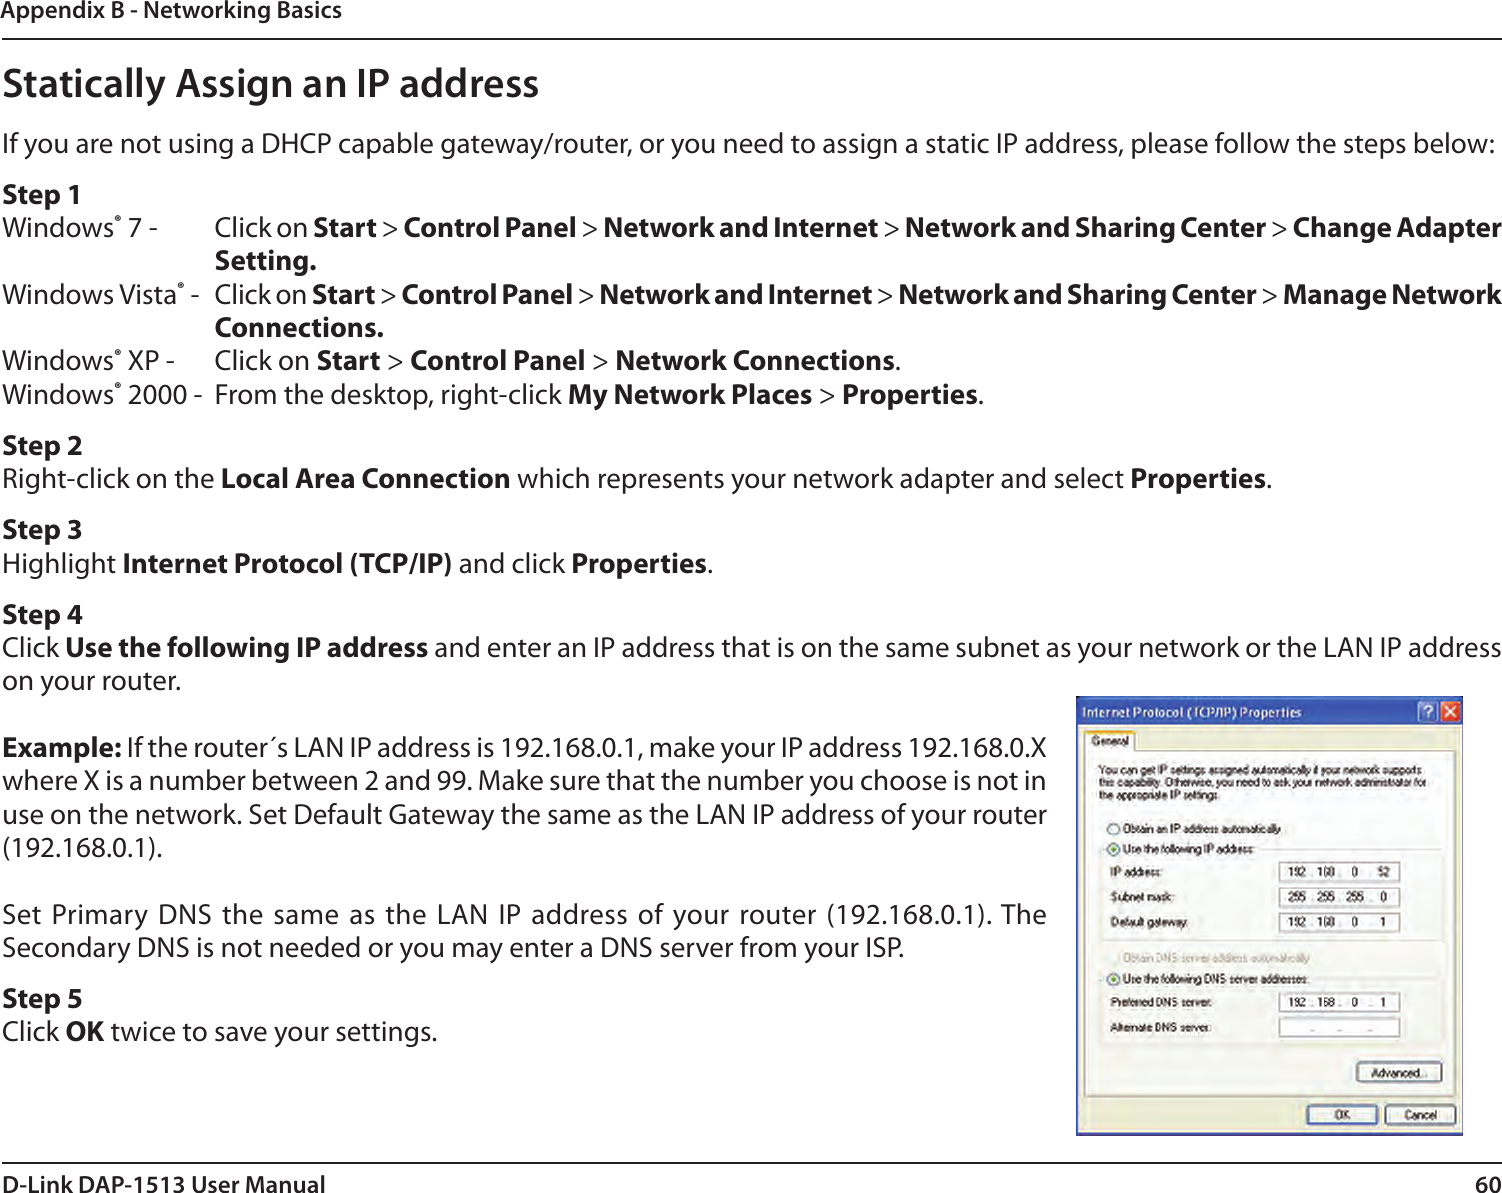 60D-Link DAP-1513 User ManualAppendix B - Networking BasicsStatically Assign an IP addressIf you are not using a DHCP capable gateway/router, or you need to assign a static IP address, please follow the steps below:Step 1Windows® 7 -  Click on Start &gt; Control Panel &gt; Network and Internet &gt; Network and Sharing Center &gt; Change Adapter Setting. Windows Vista® -  Click on Start &gt; Control Panel &gt; Network and Internet &gt; Network and Sharing Center &gt; Manage Network Connections.Windows® XP -  Click on Start &gt; Control Panel &gt; Network Connections.Windows® 2000 -  From the desktop, right-click My Network Places &gt; Properties.Step 2Right-click on the Local Area Connection which represents your network adapter and select Properties.Step 3Highlight Internet Protocol (TCP/IP) and click Properties.Step 4Click Use the following IP address and enter an IP address that is on the same subnet as your network or the LAN IP address on your router.Example: If the router´s LAN IP address is 192.168.0.1, make your IP address 192.168.0.X where X is a number between 2 and 99. Make sure that the number you choose is not in use on the network. Set Default Gateway the same as the LAN IP address of your router (192.168.0.1). Set Primary DNS the  same as the LAN  IP address of your router (192.168.0.1). The Secondary DNS is not needed or you may enter a DNS server from your ISP.Step 5Click OK twice to save your settings.